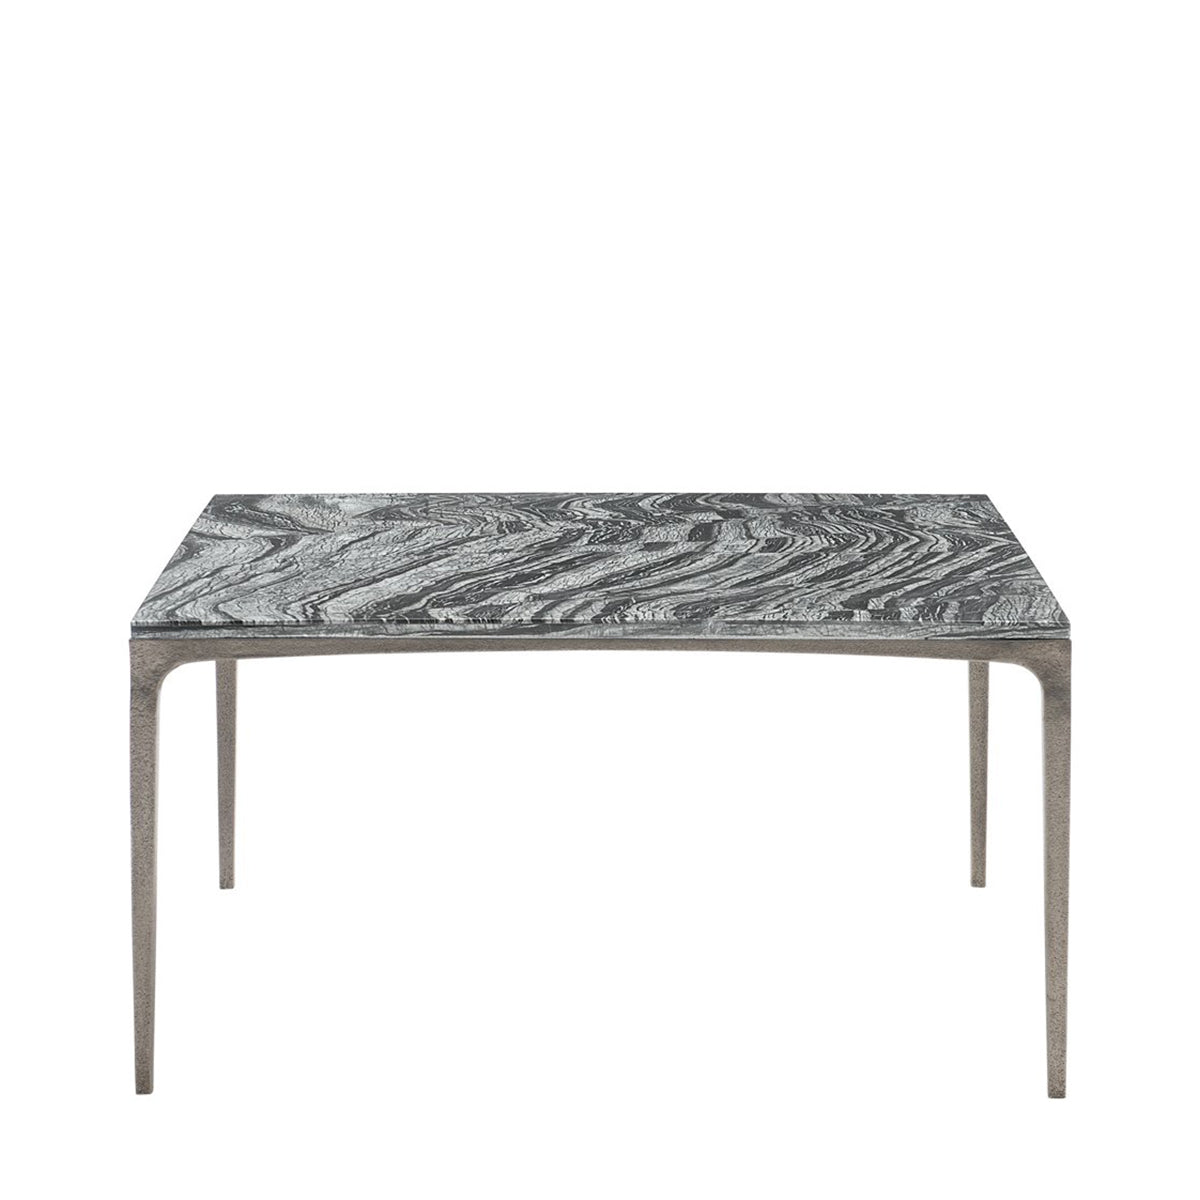 STRATA MARBLE COCKTAIL TABLE